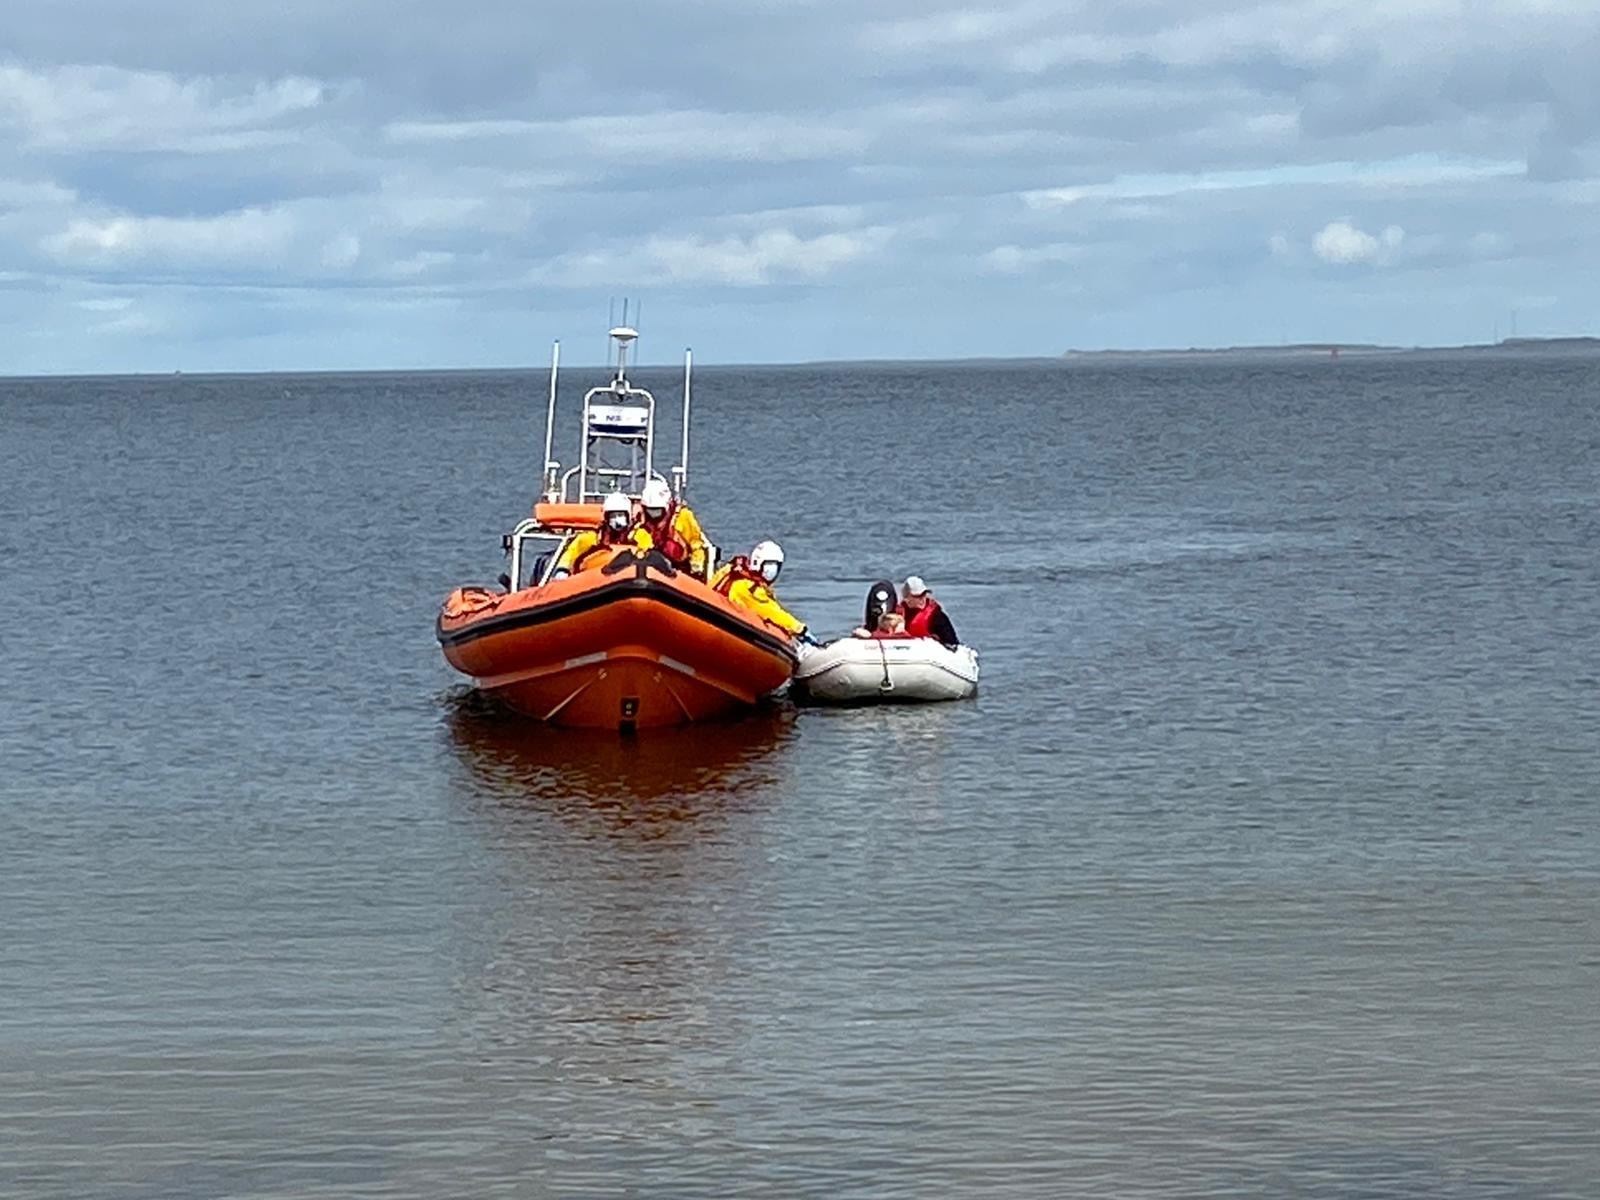 Dinghy in alongside tow returning to shore. Photo: CG/Martin Hier